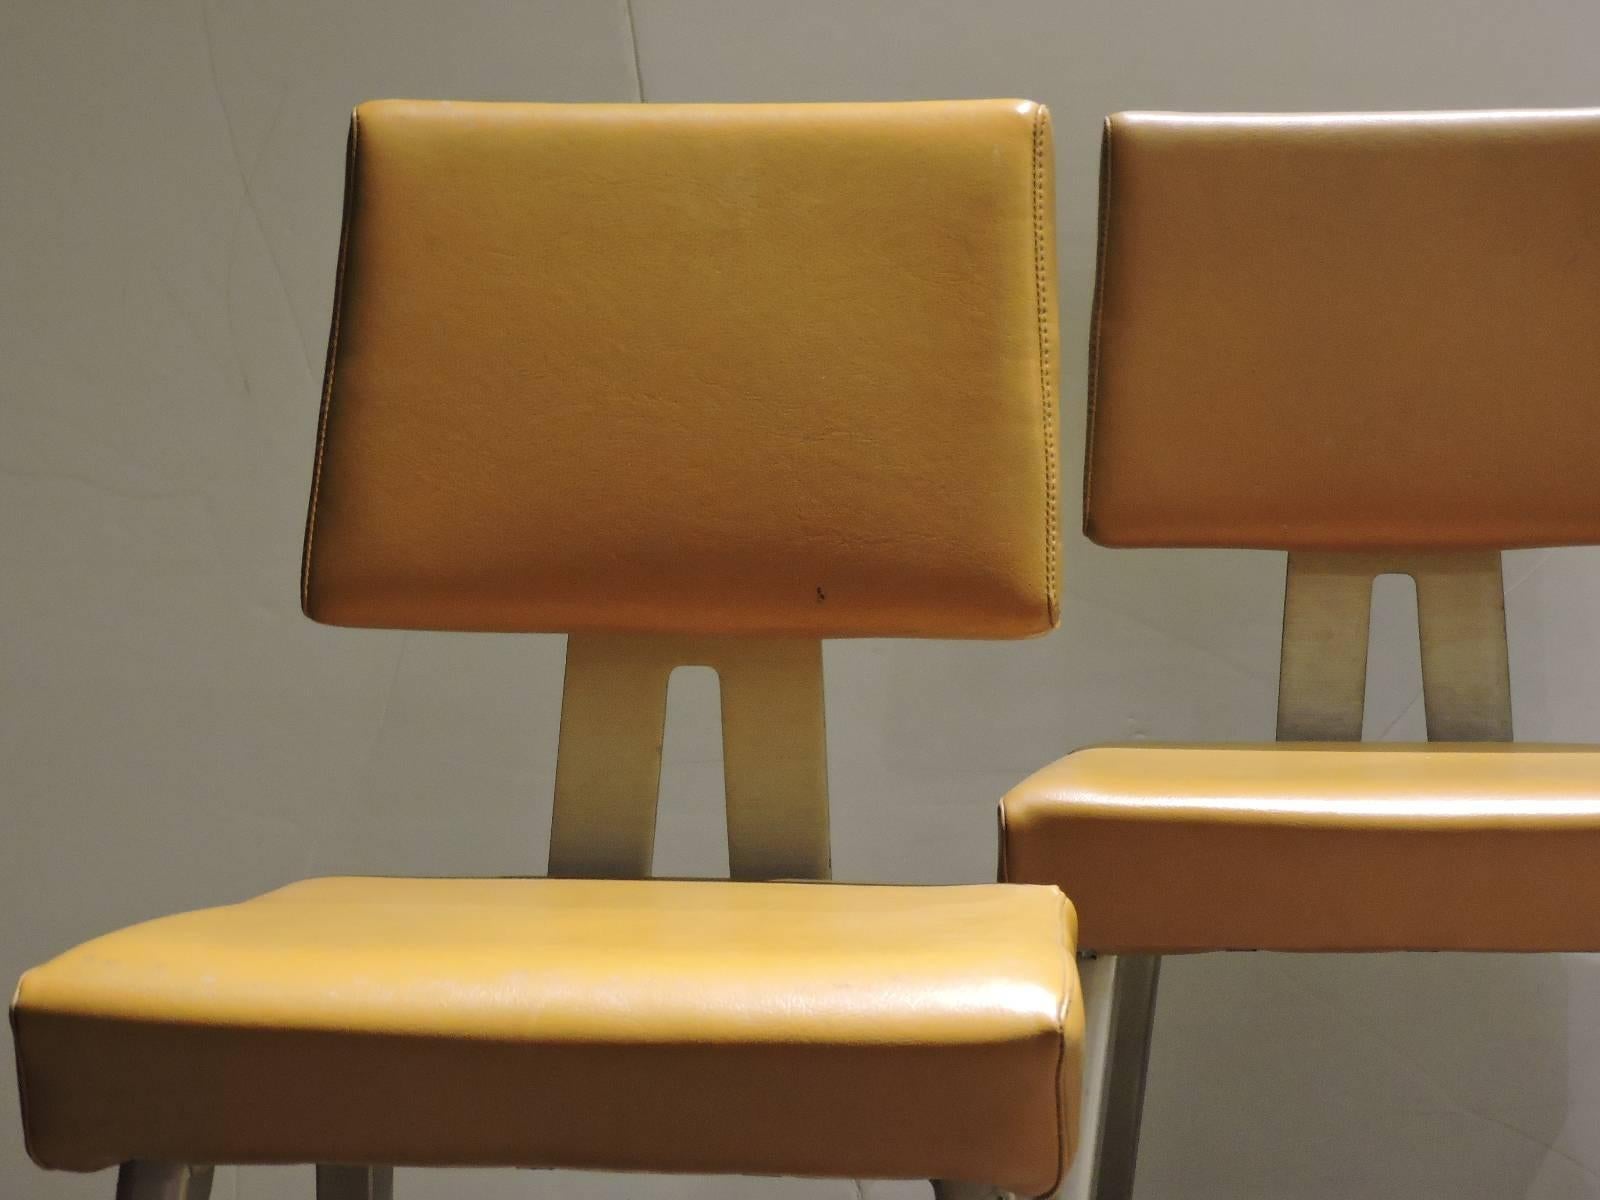 A very good pair of mid 20th century industrial General Fireproofing GoodForm aluminum task chairs in great all original condition right down to the period vibrant gold textured vinyl upholstery.